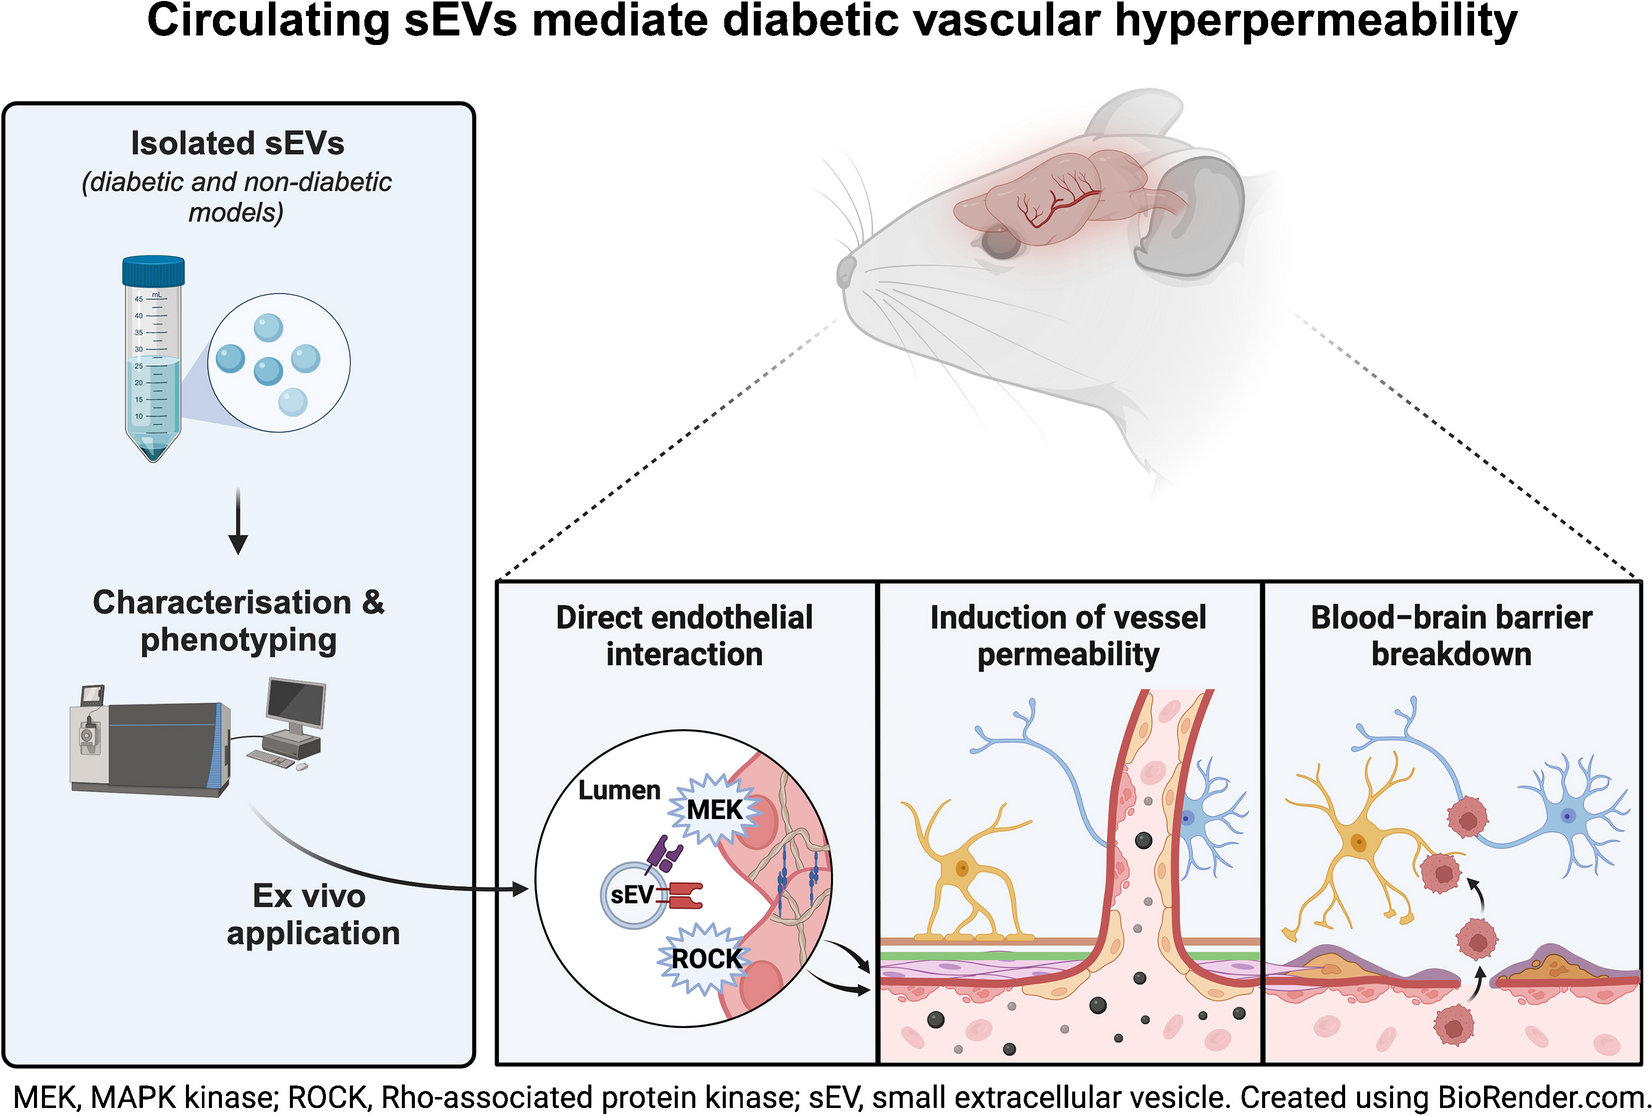 Circulating small extracellular vesicles mediate vascular hyperpermeability in diabetes